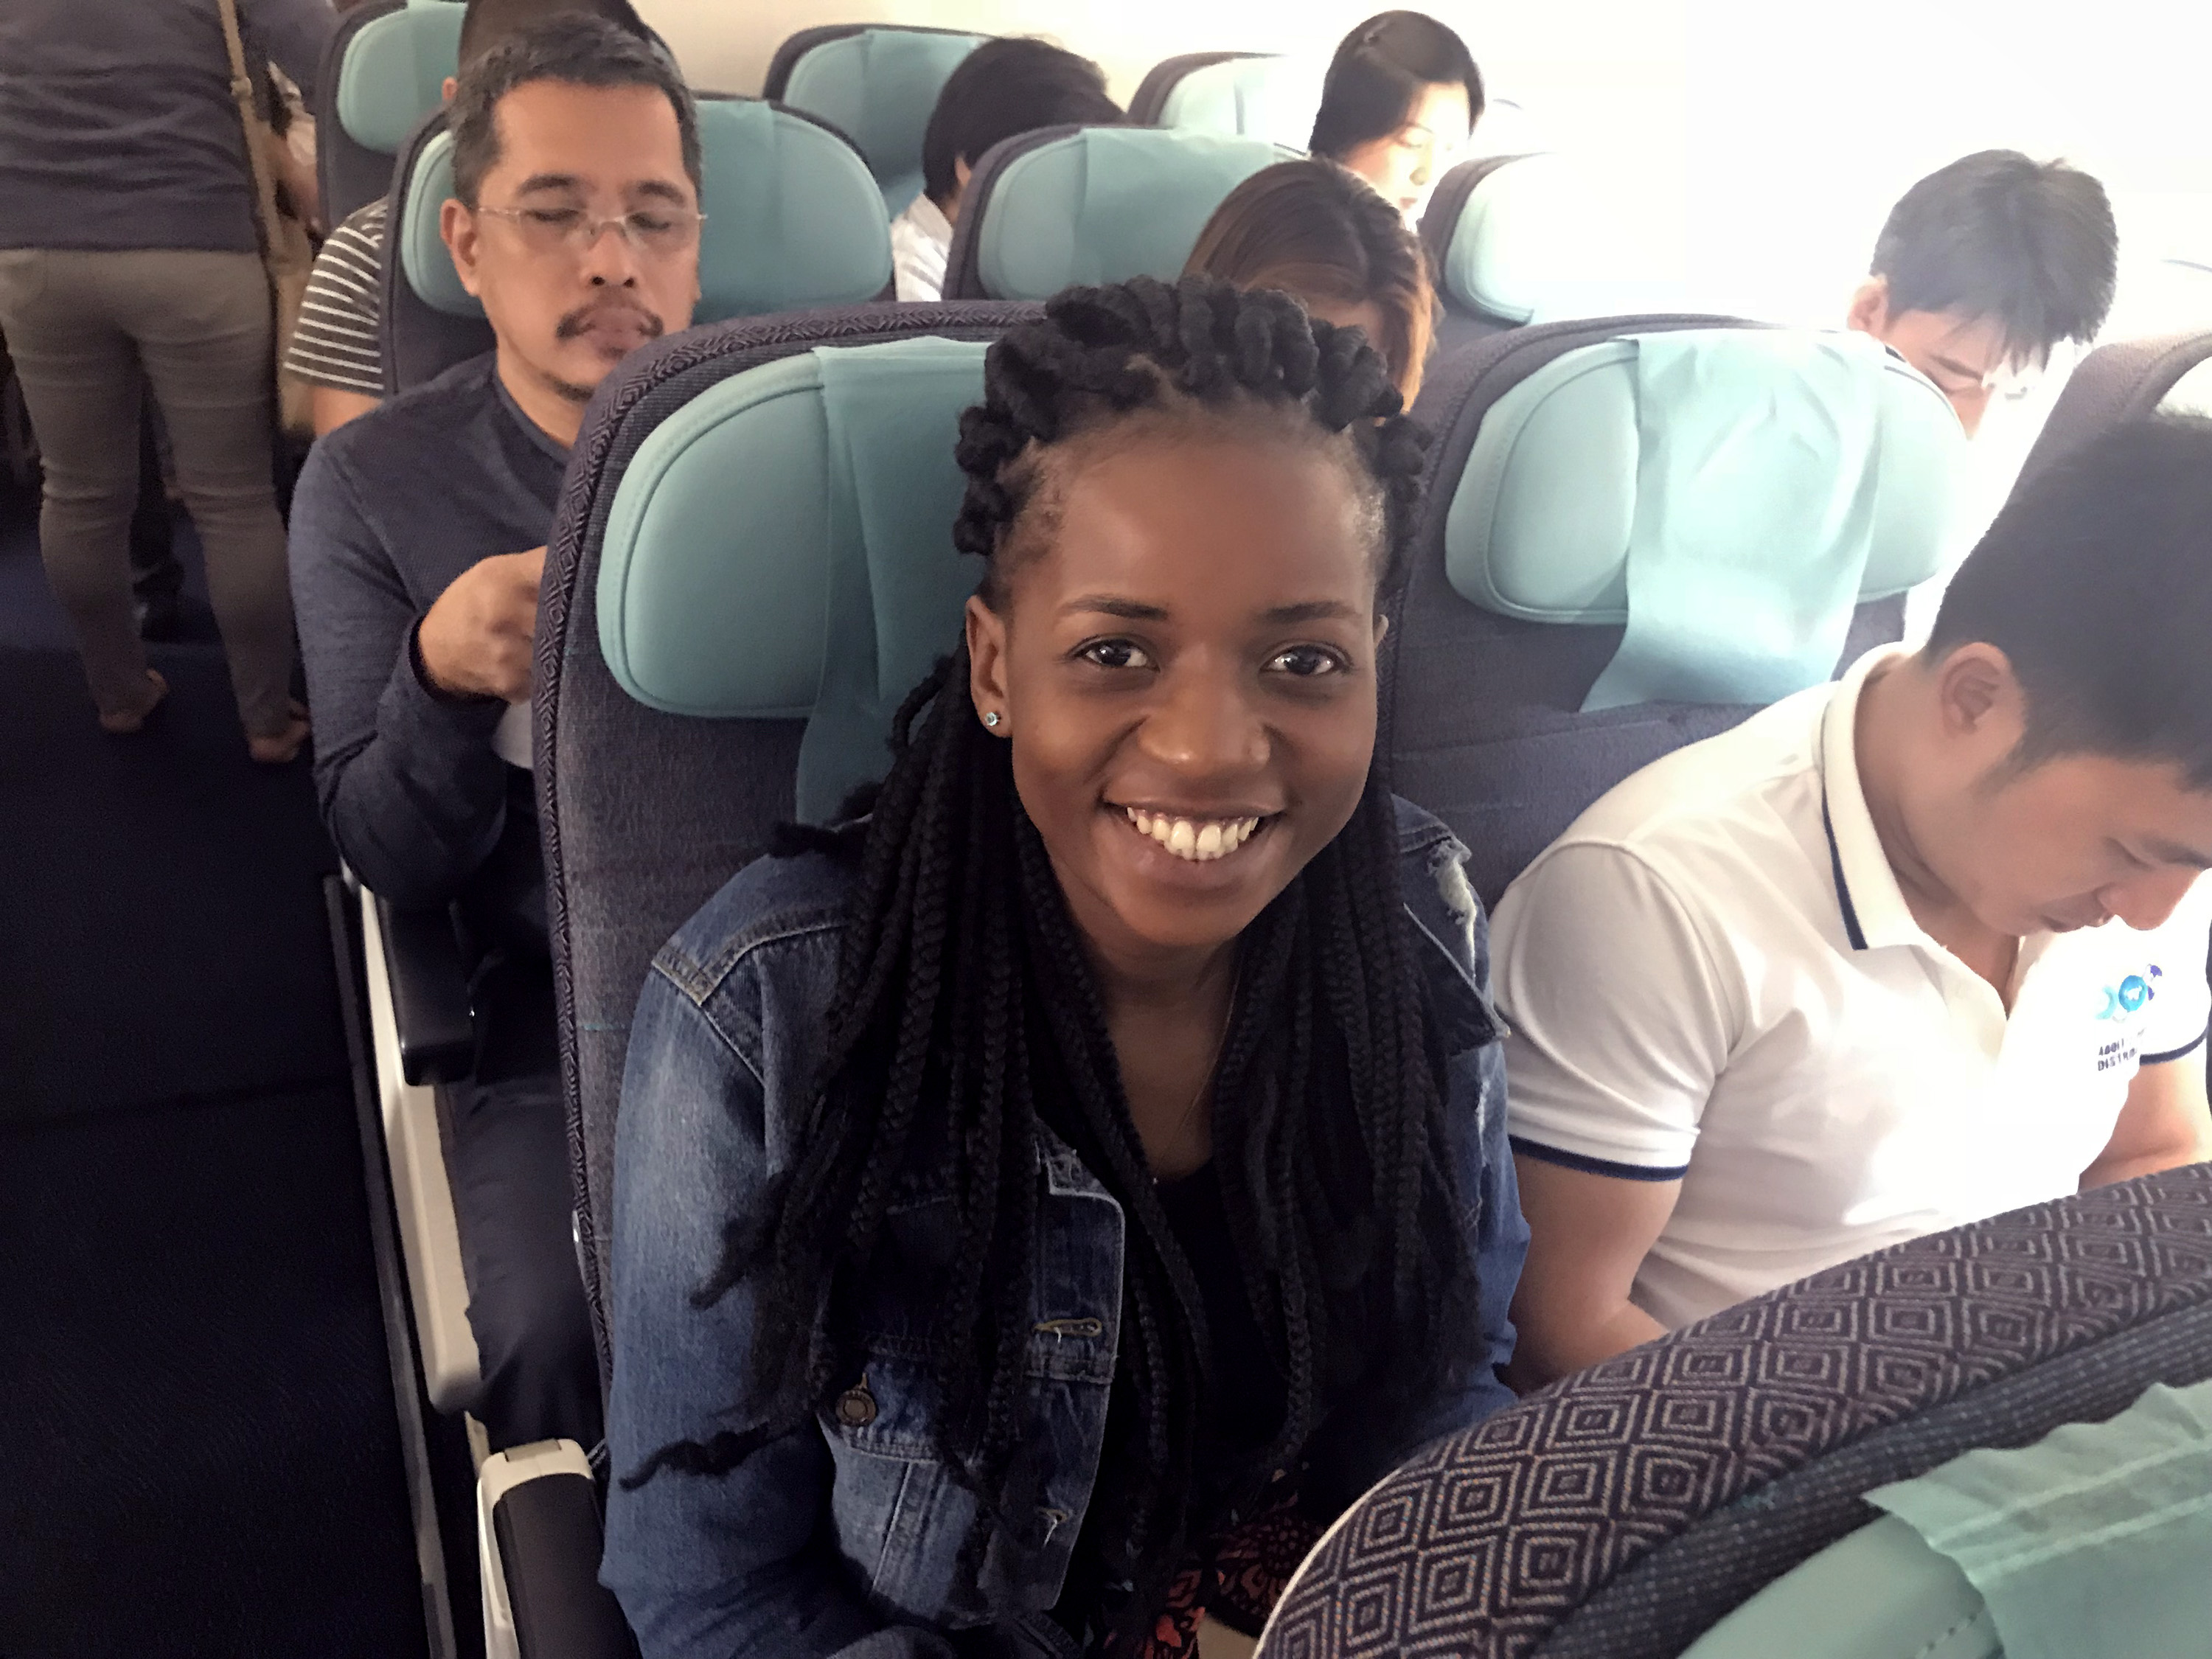 Miracle Osman smiles as she waits for her flight to depart from Davao to Manila. Osman is working with Filipino attorneys on paperwork to allow her to leave the Philippines. Photo courtesy of Thomas Kemper, GBGM.